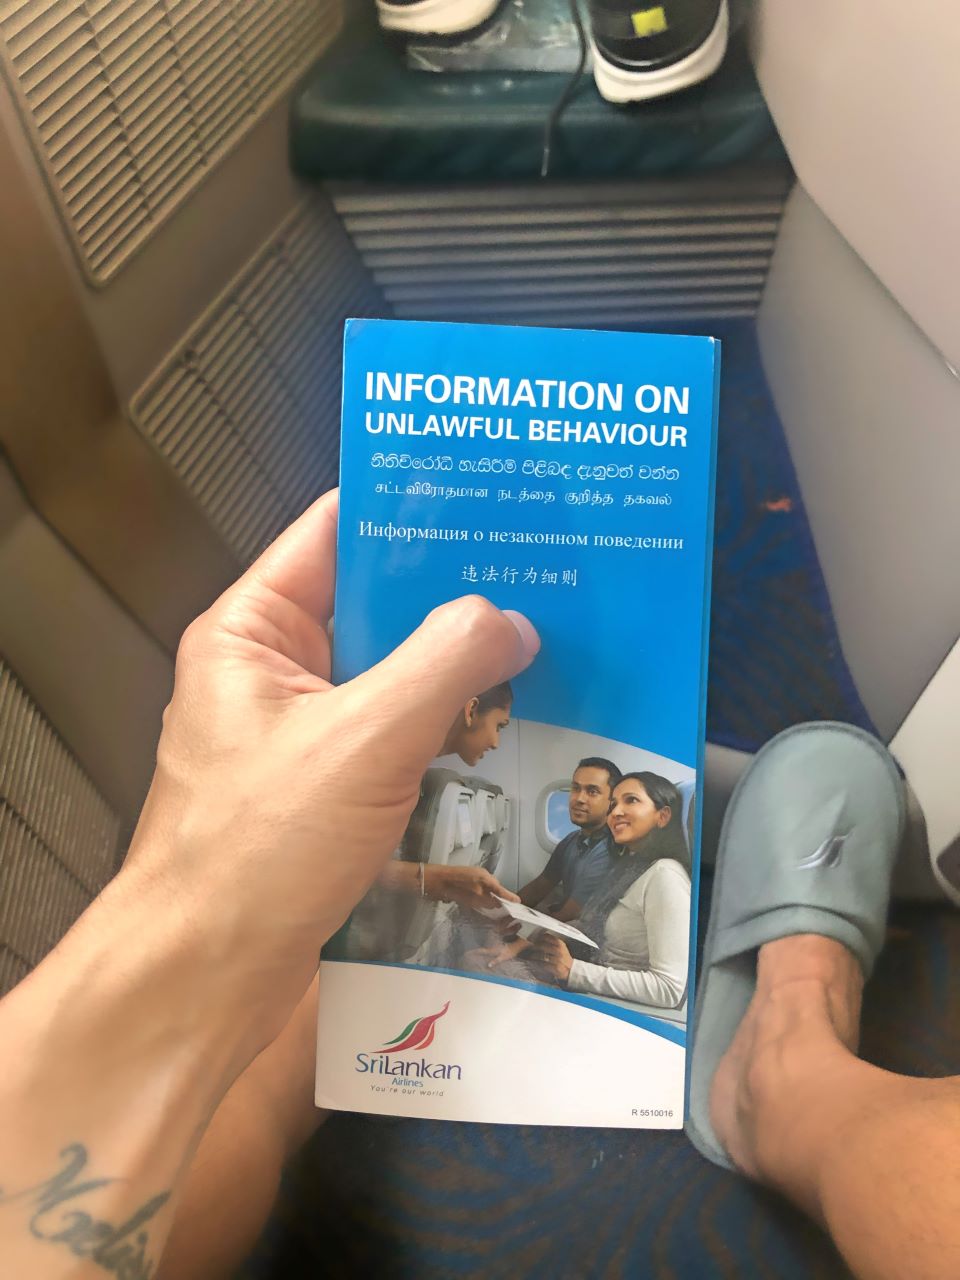 Sri Lankan Airlines Guidelines and Policy